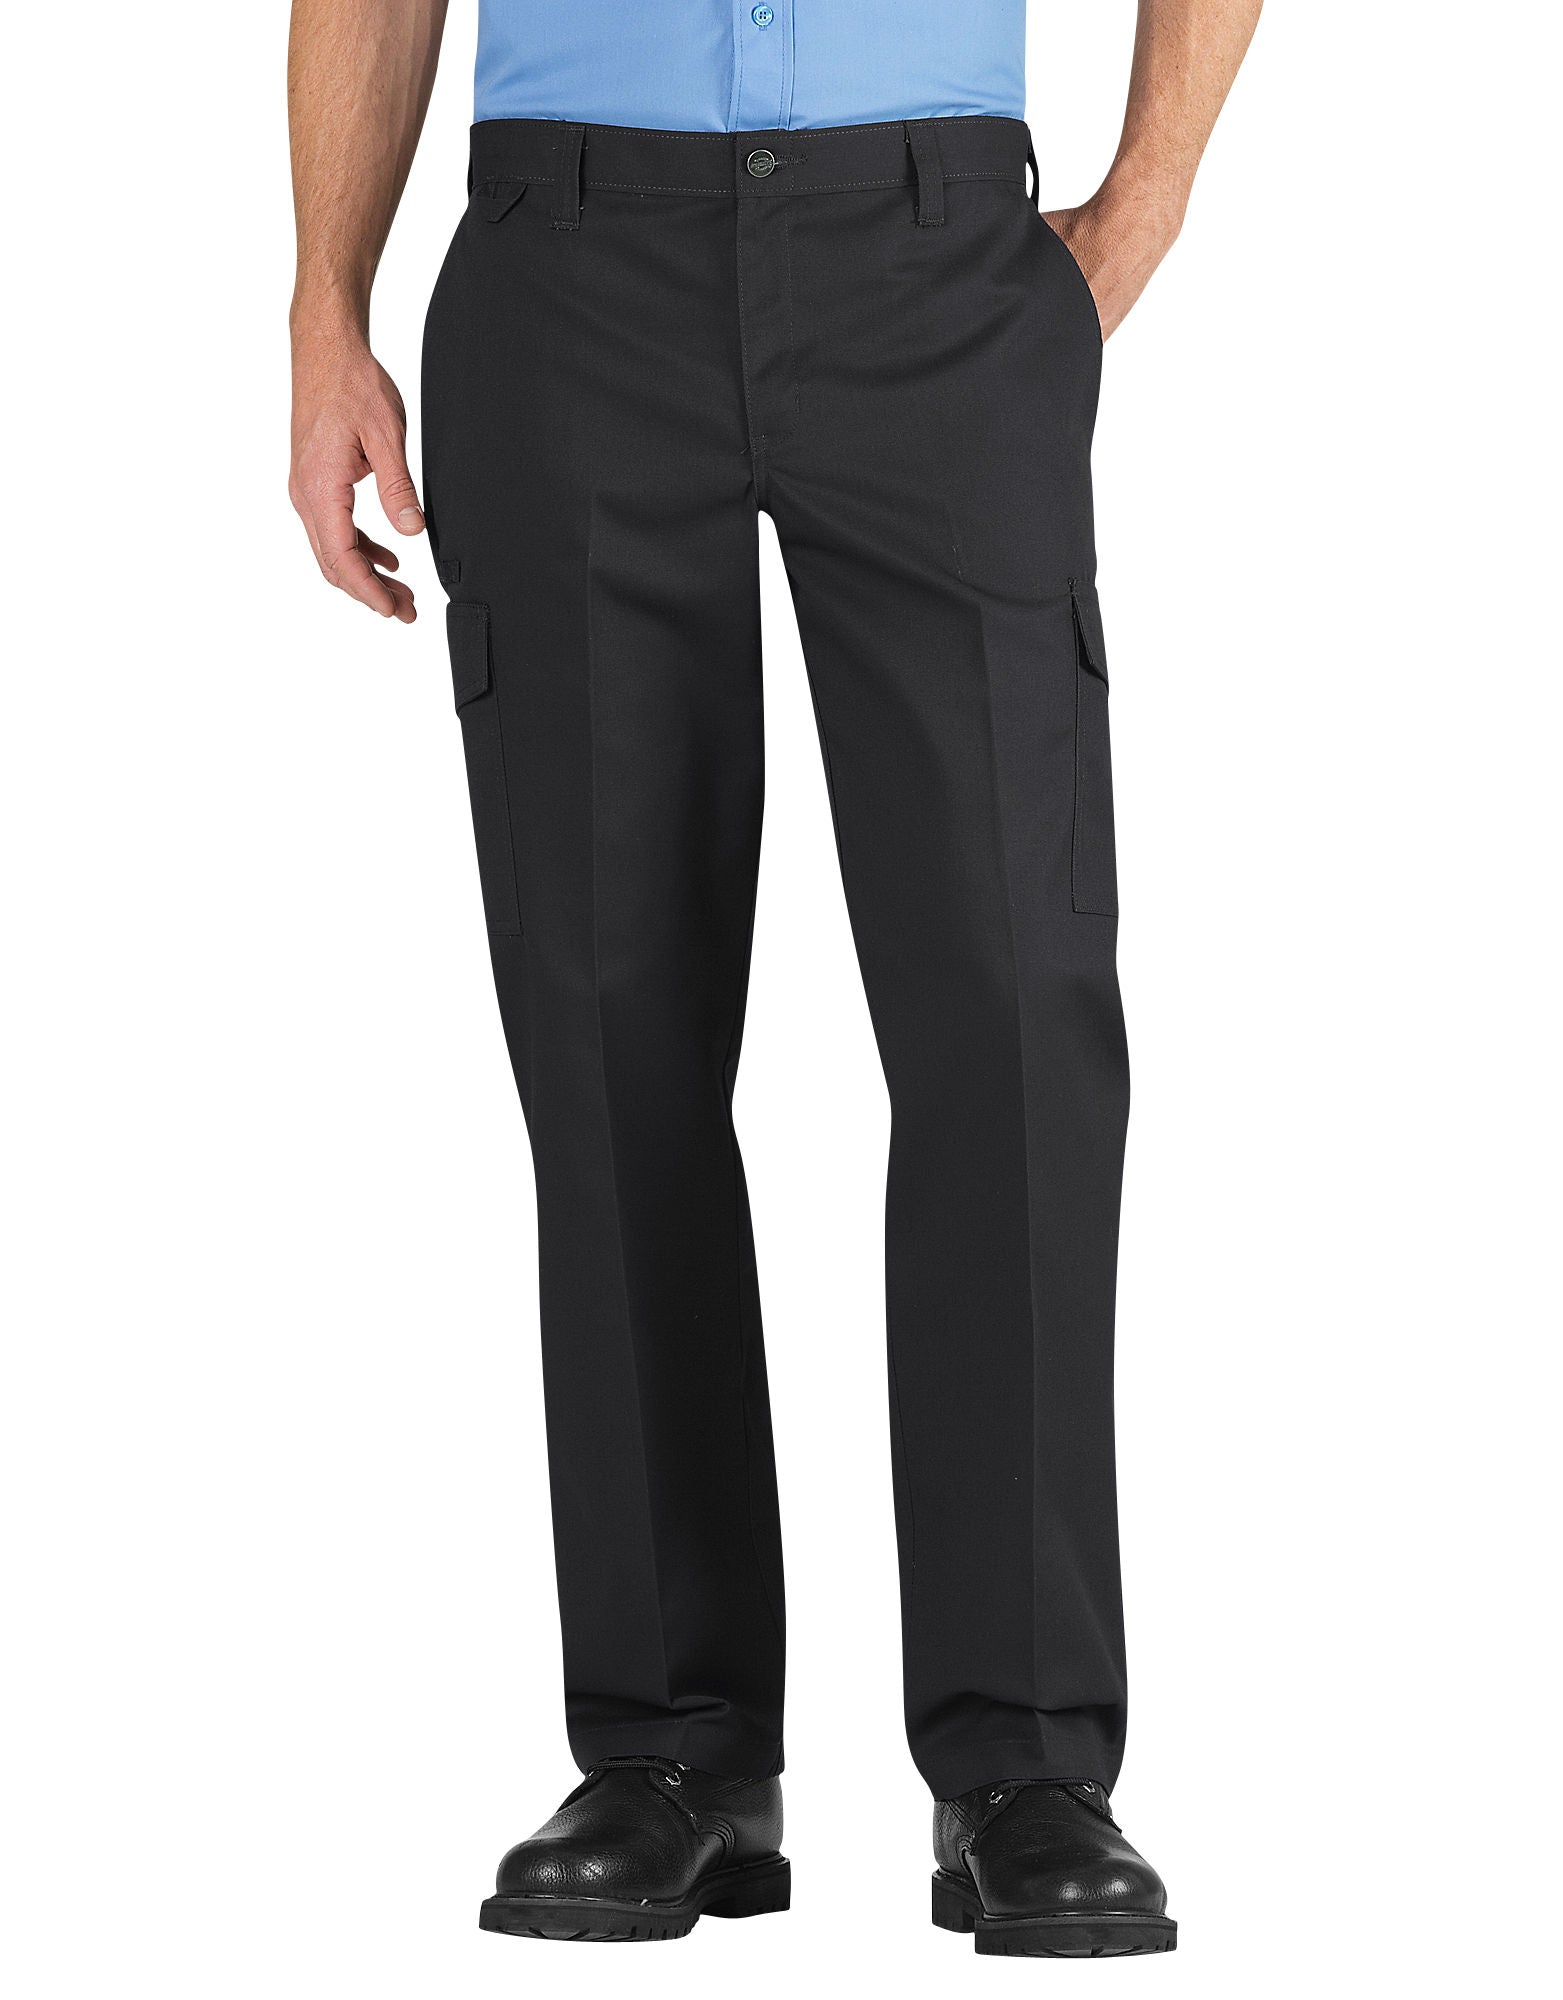 DIC-LP537 - Dickies Mens Industrial Relaxed Fit Straight Leg Cargo Pants